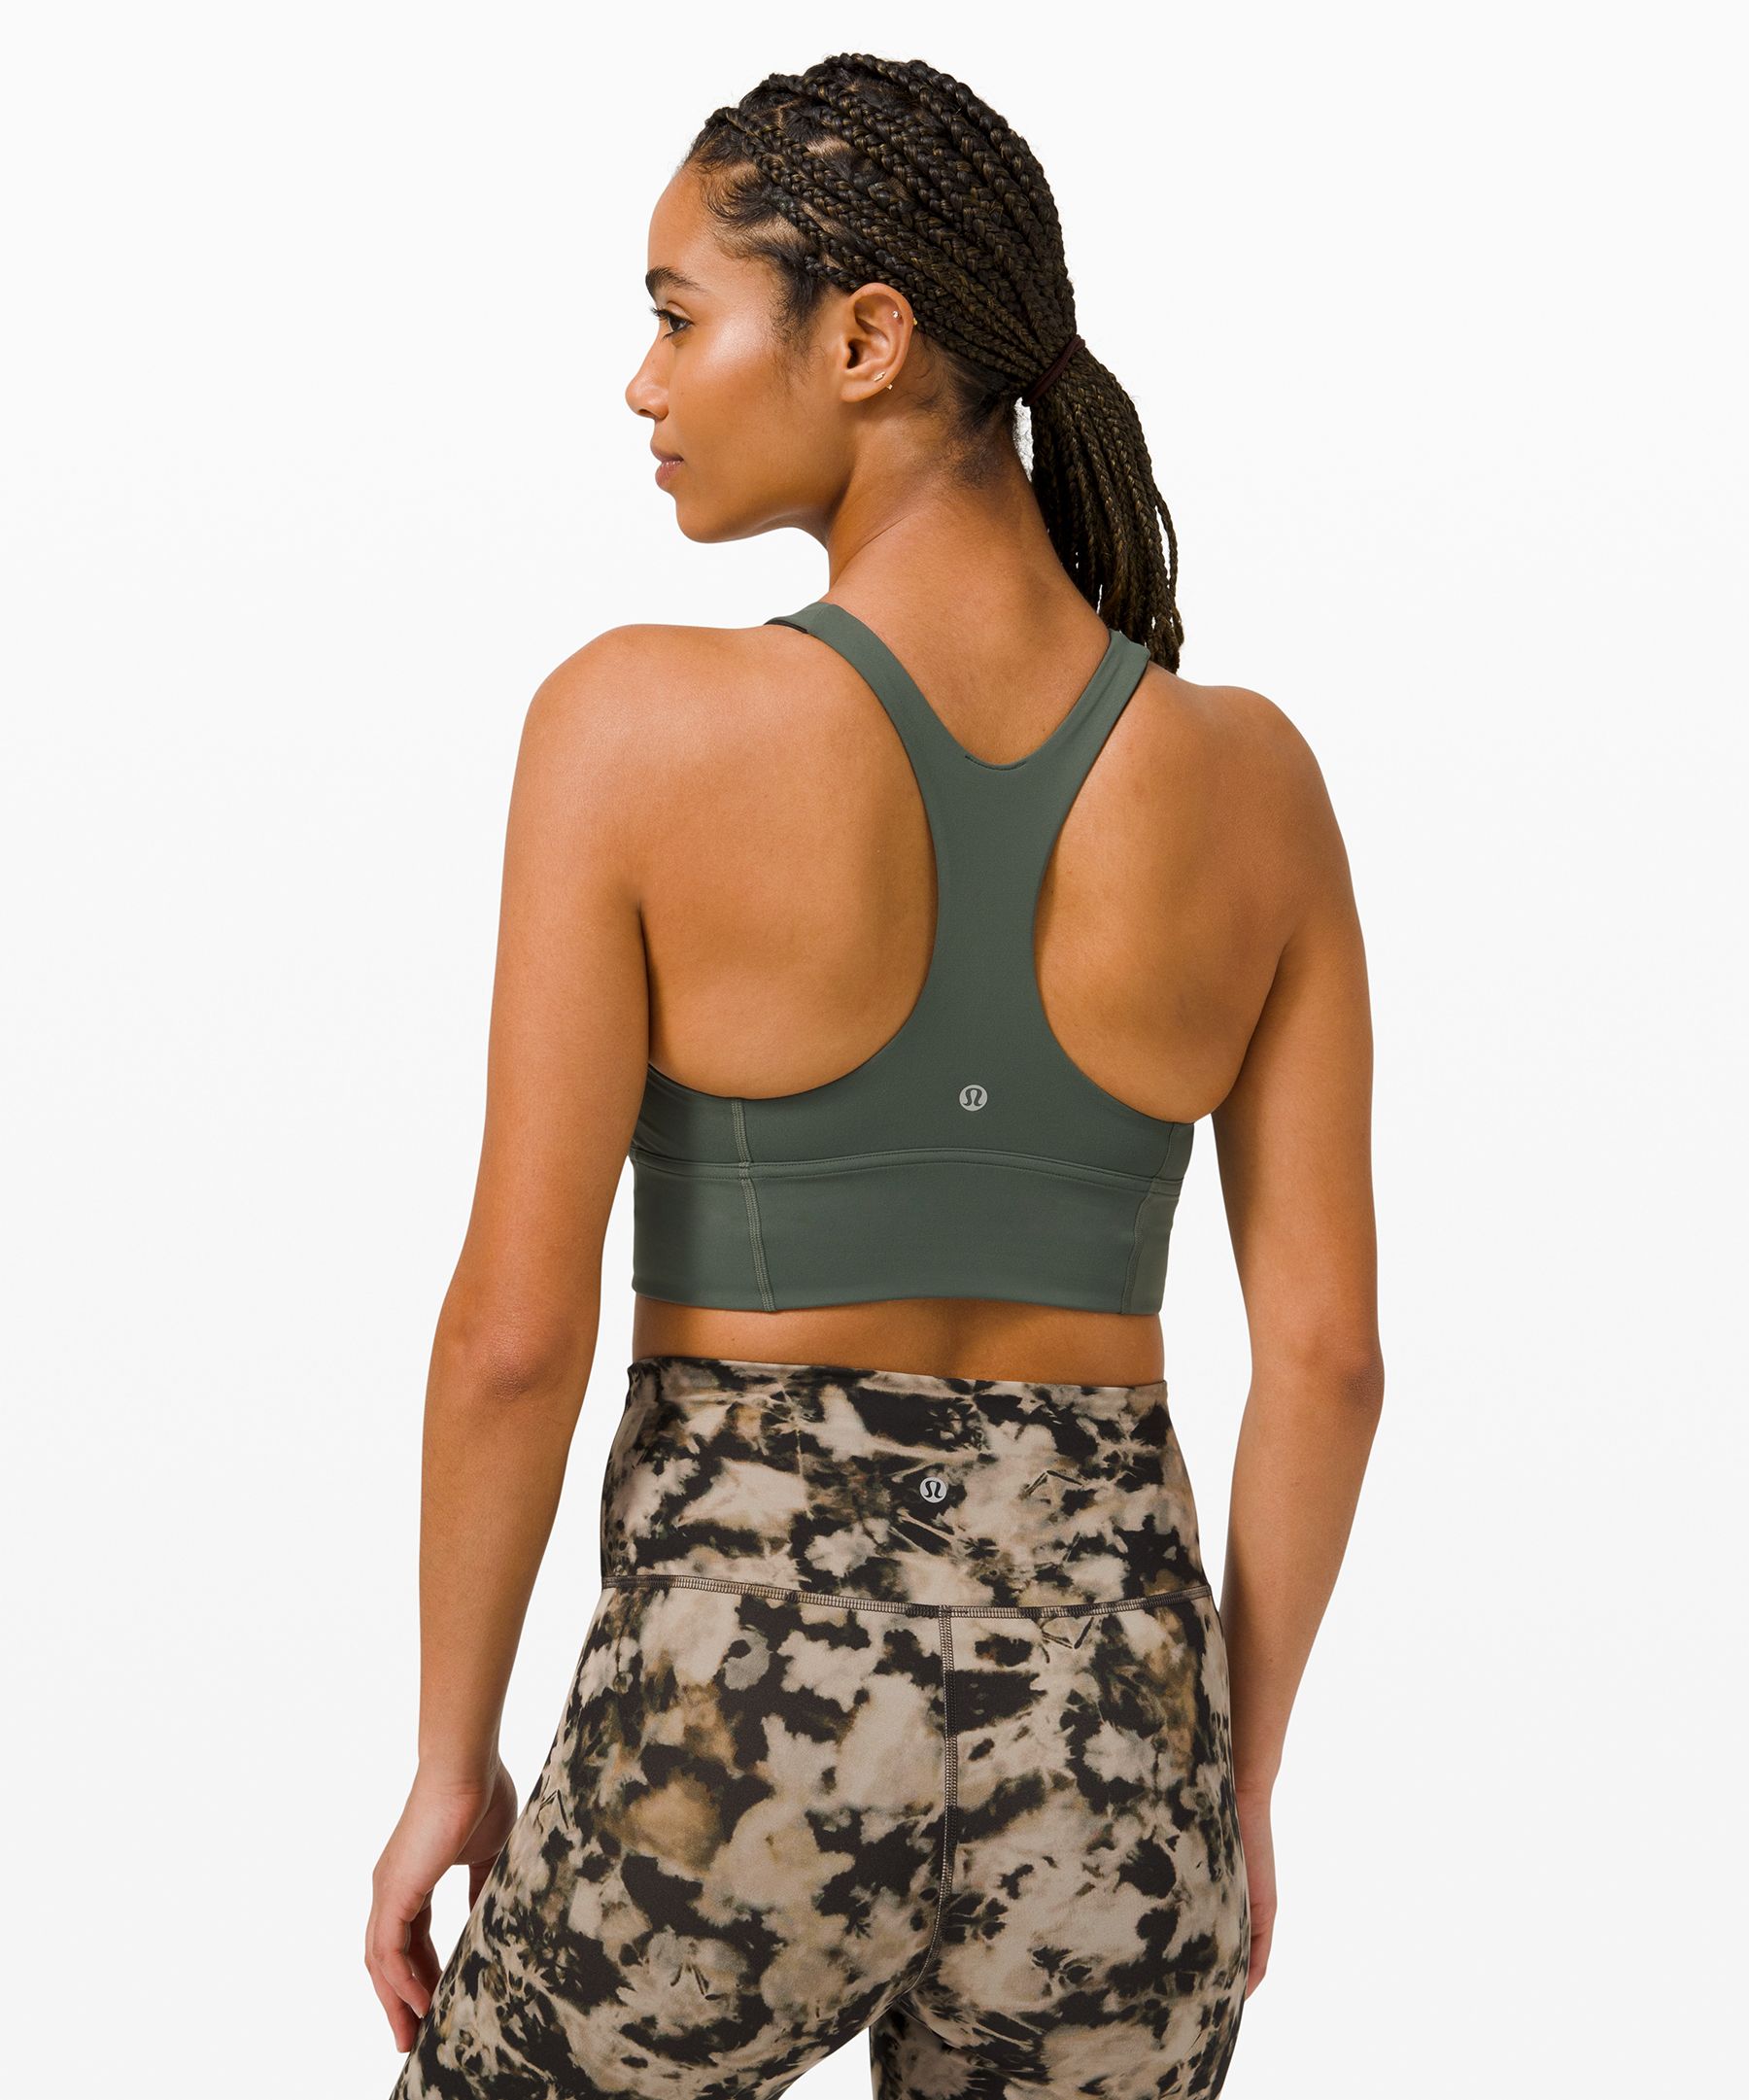 Lululemon Wunder Train Bra Review Cnet  International Society of Precision  Agriculture